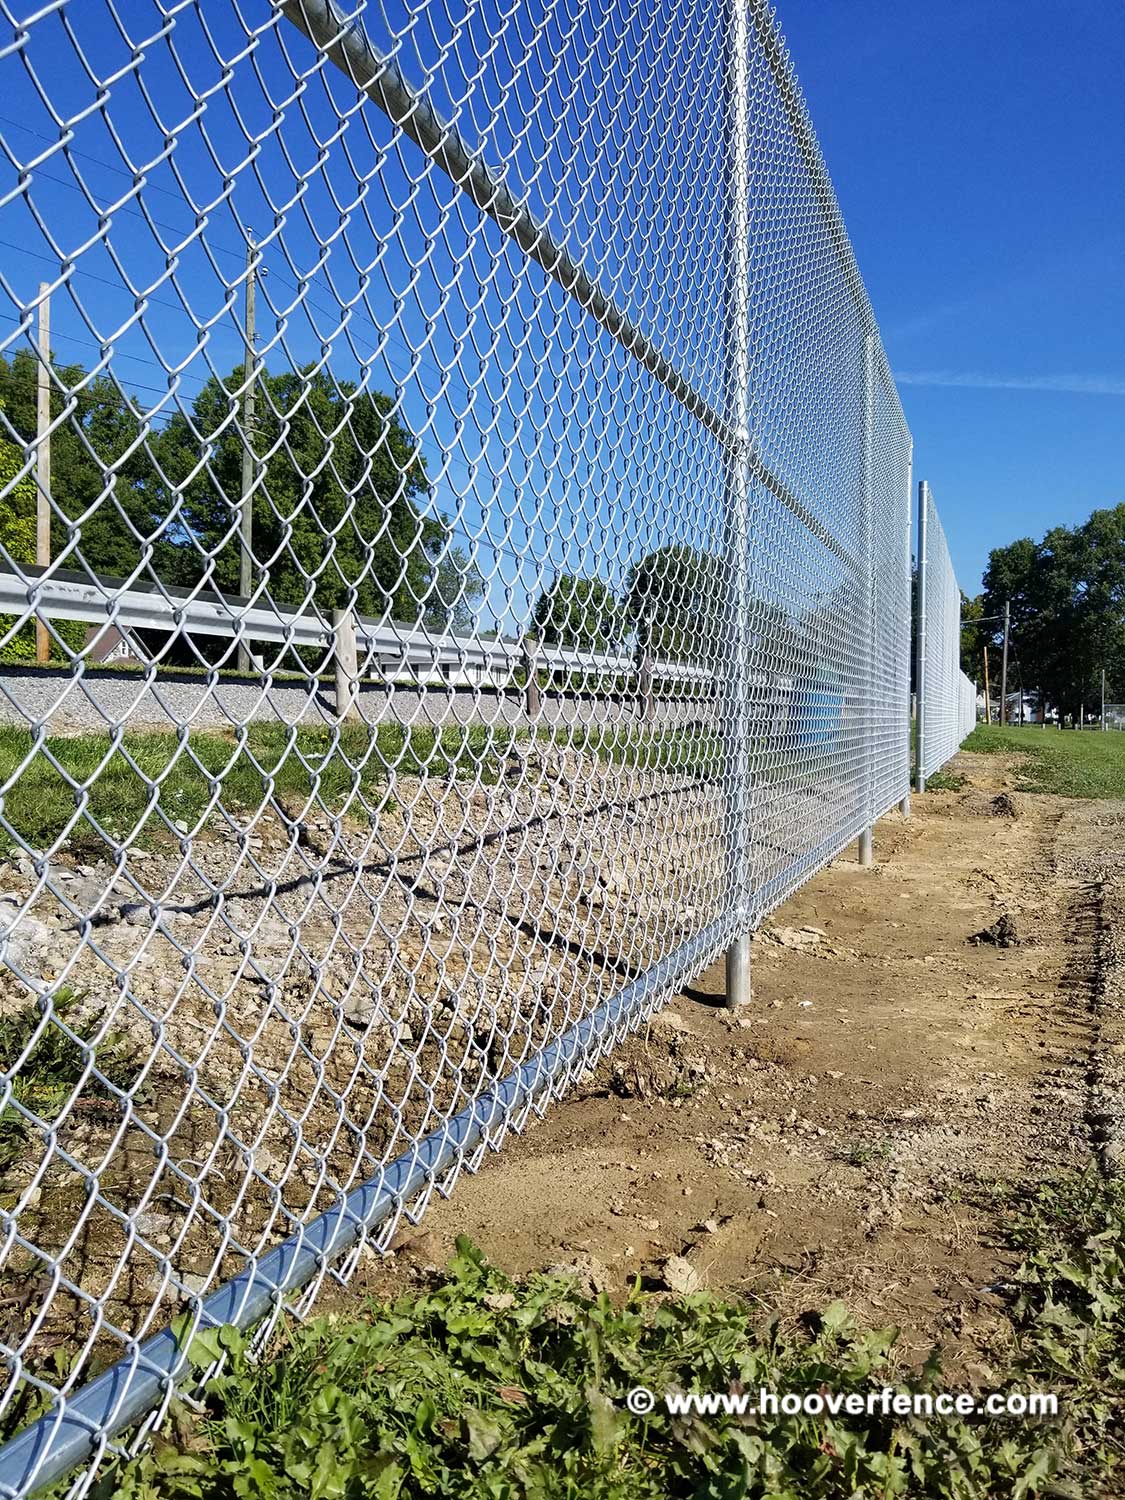 Hoover Fence Co Installation Baseball Sideline Fence - Field 4 - Newton Falls, OH